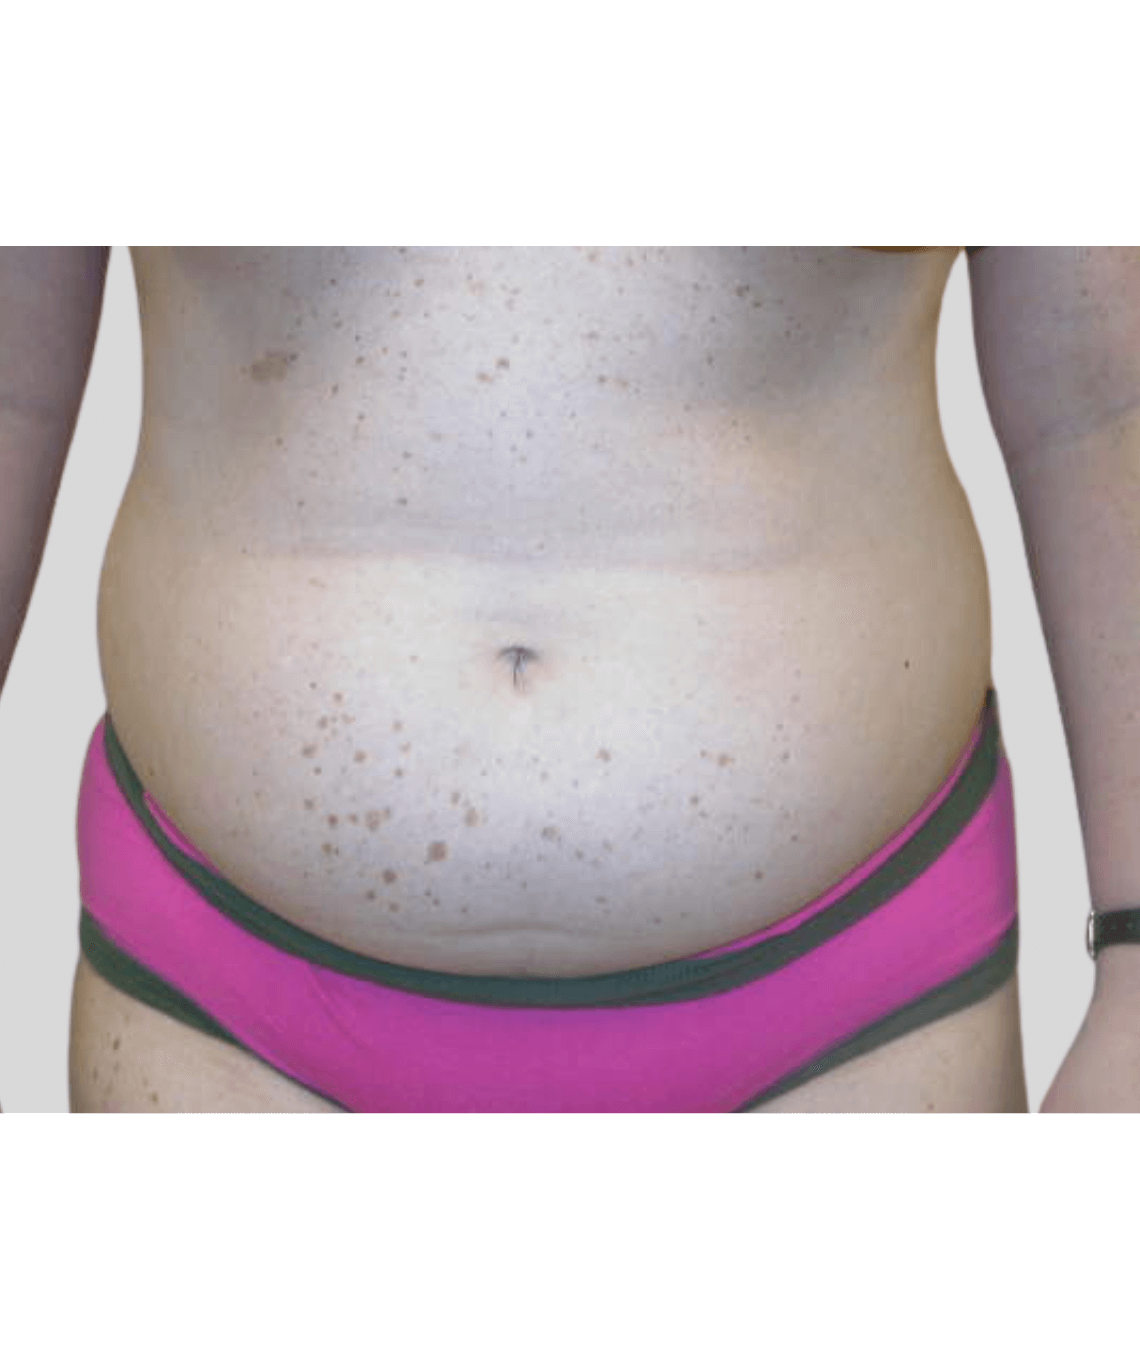 liposuction - before and after photos - prma plastic surgery - case 44